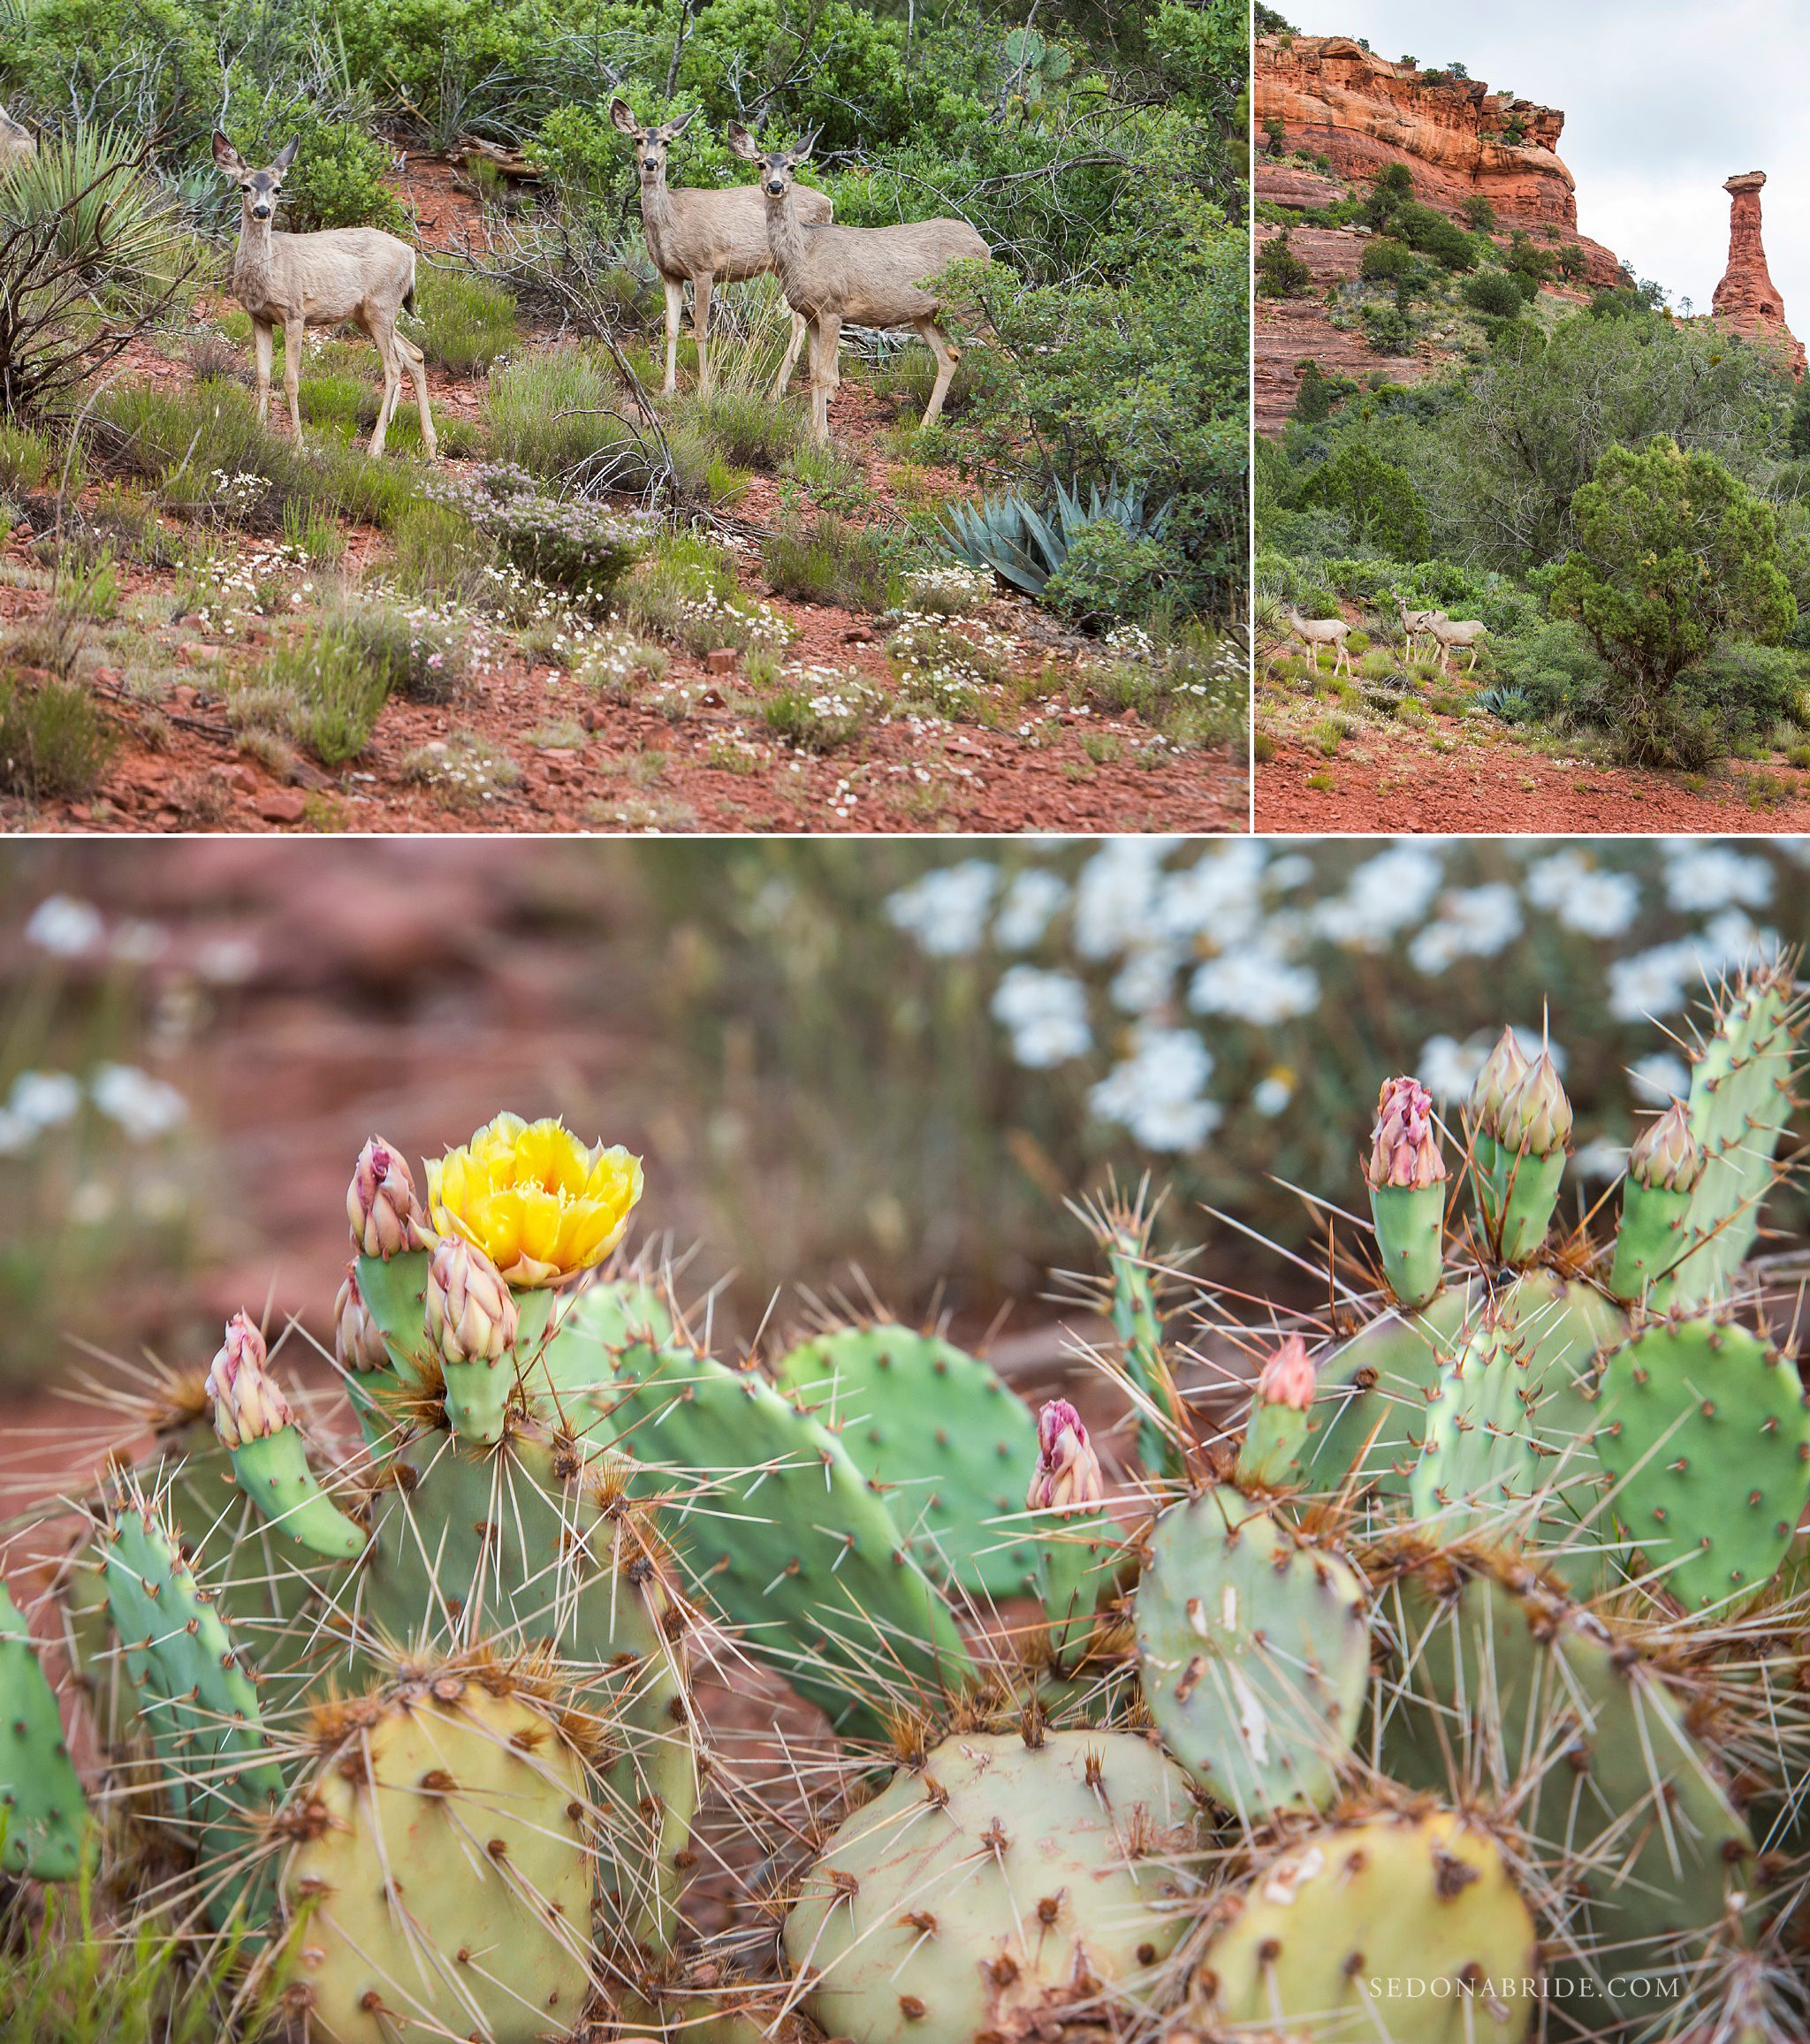 deer and cactus flowers at the start of a hike to a wedding location at Enchantment Resort